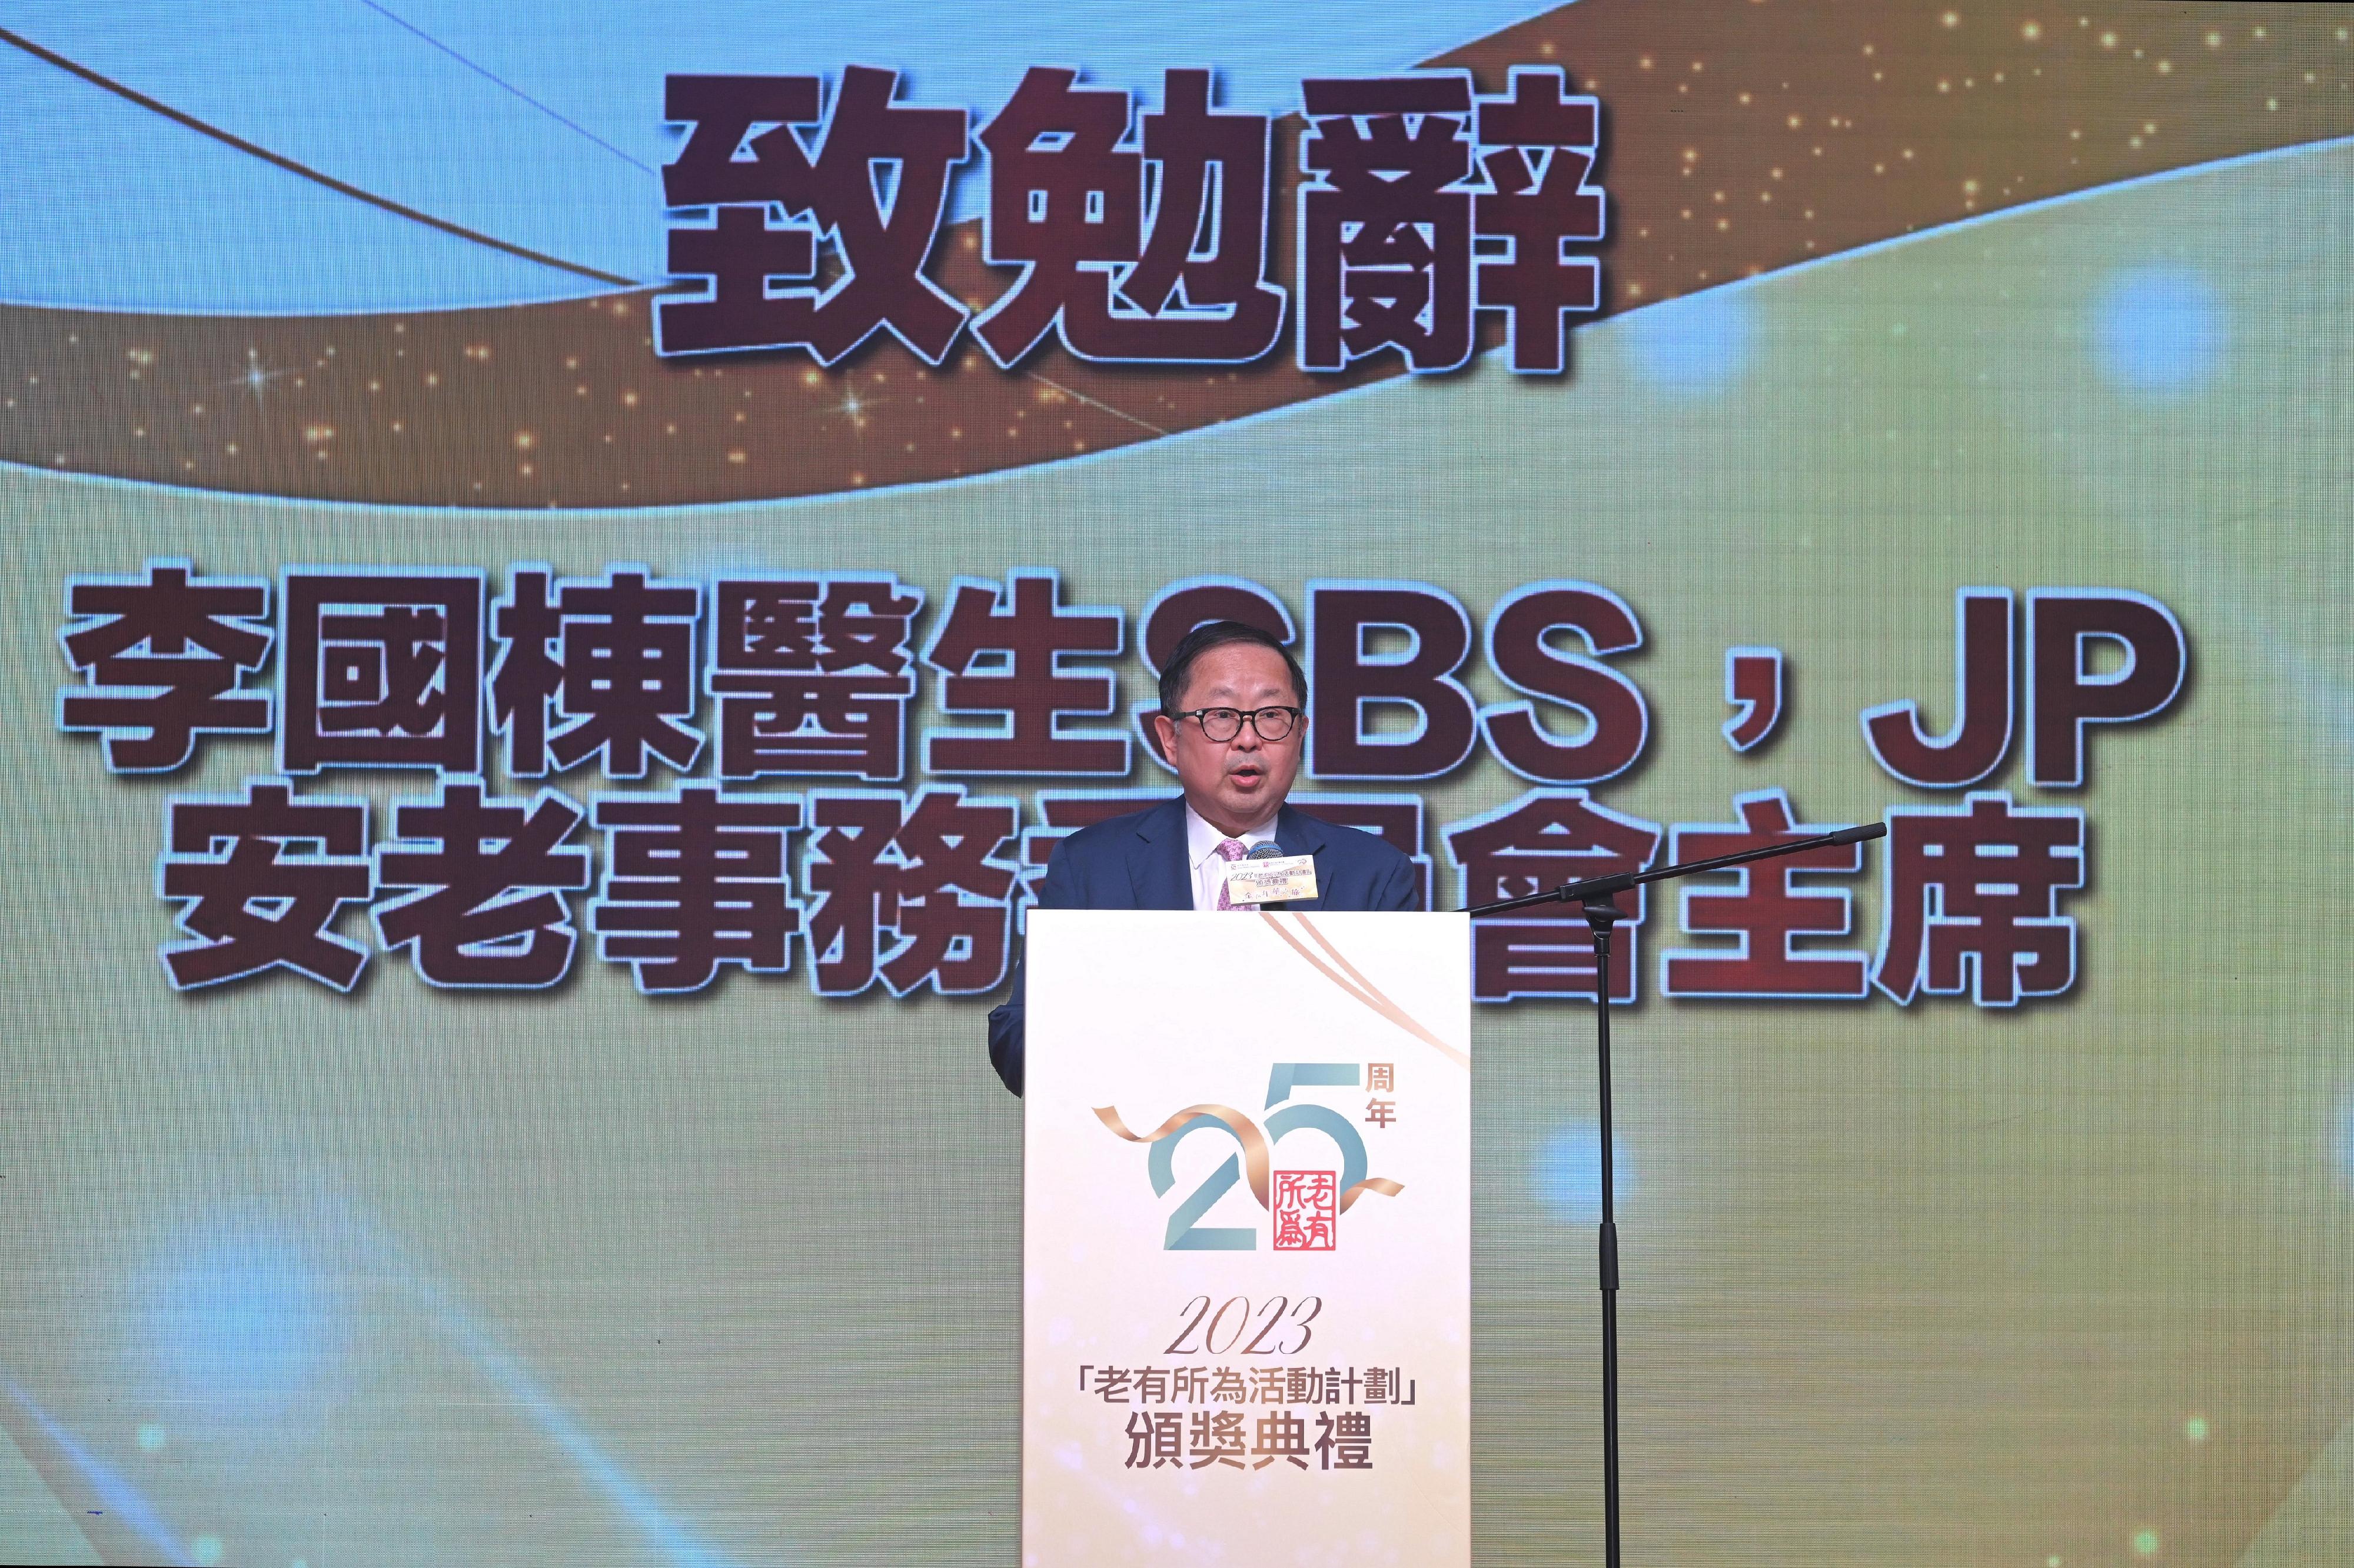 The Social Welfare Department today (November 1) held the 2023 Award Presentation Ceremony of the Opportunities for the Elderly Project. Photo shows the Chairman of the Elderly Commission, Dr Donald Li, giving words of encouragement at the ceremony.